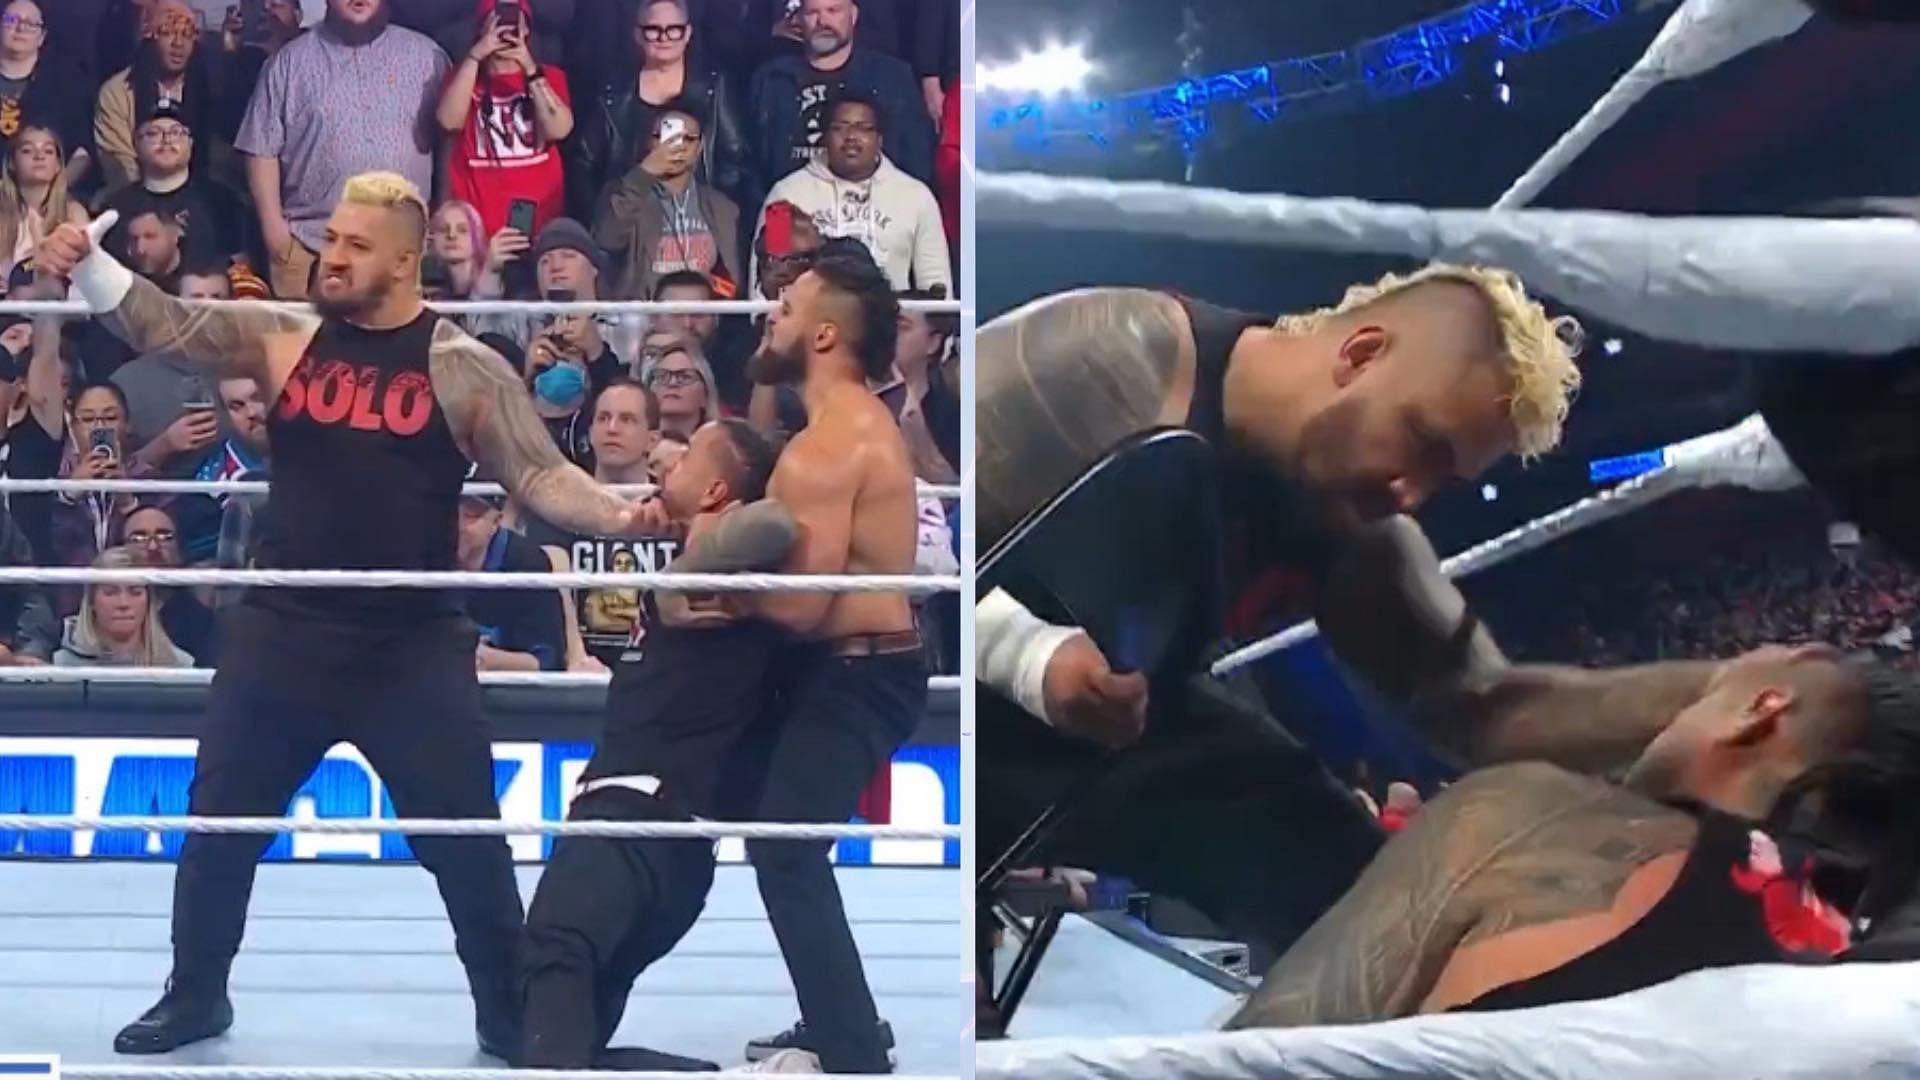 It looks like Jimmy Uso will be looking for work following the latest SmackDown.